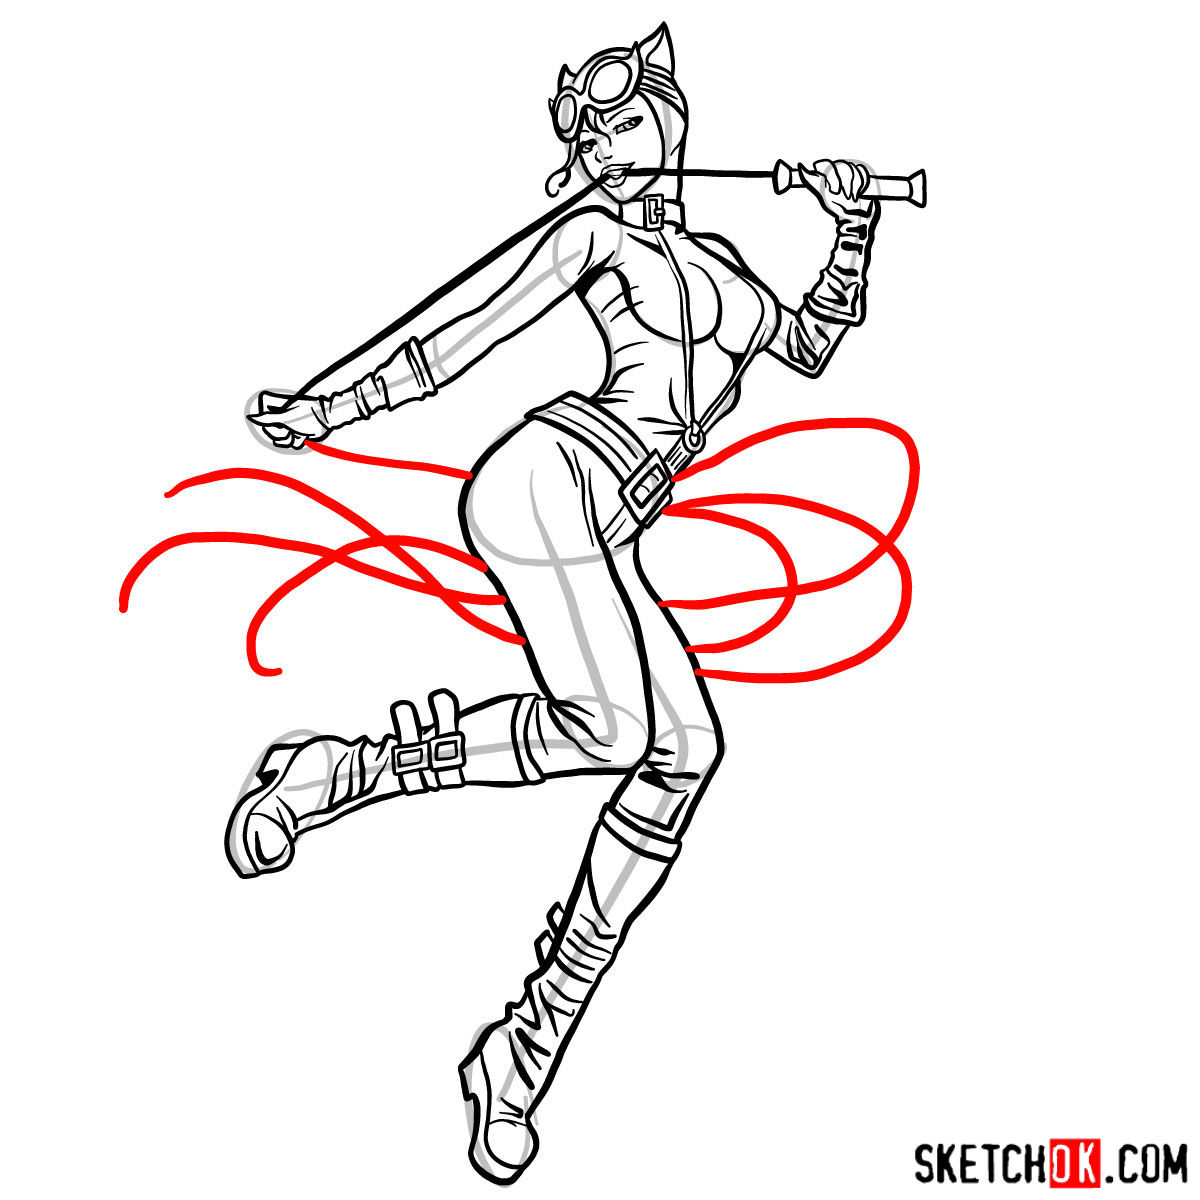 How to draw Catwoman superheroine from DC Comics - step 17